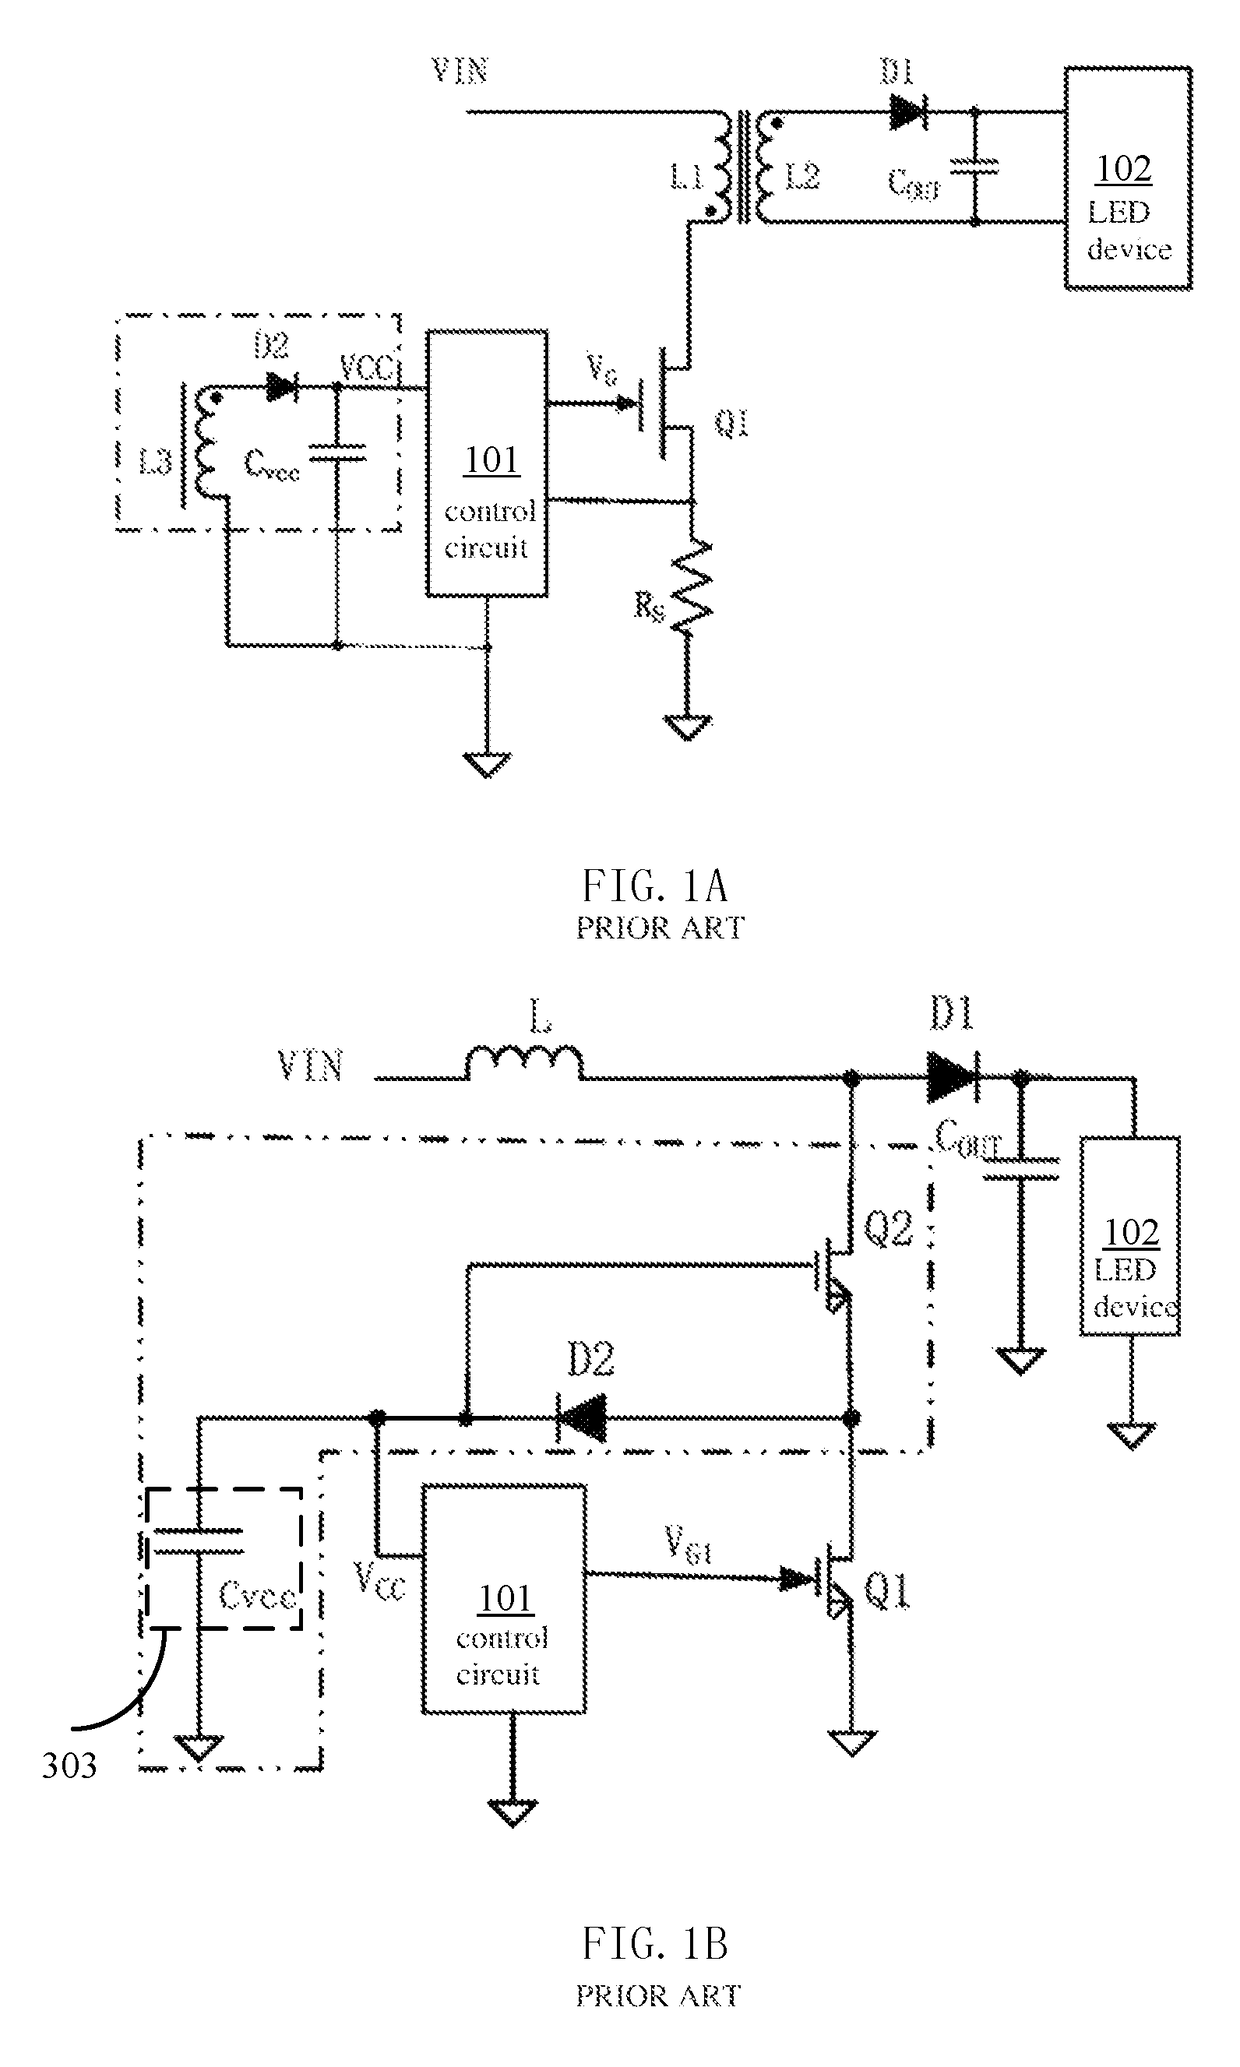 Supply voltage generating circuit and switching power supply